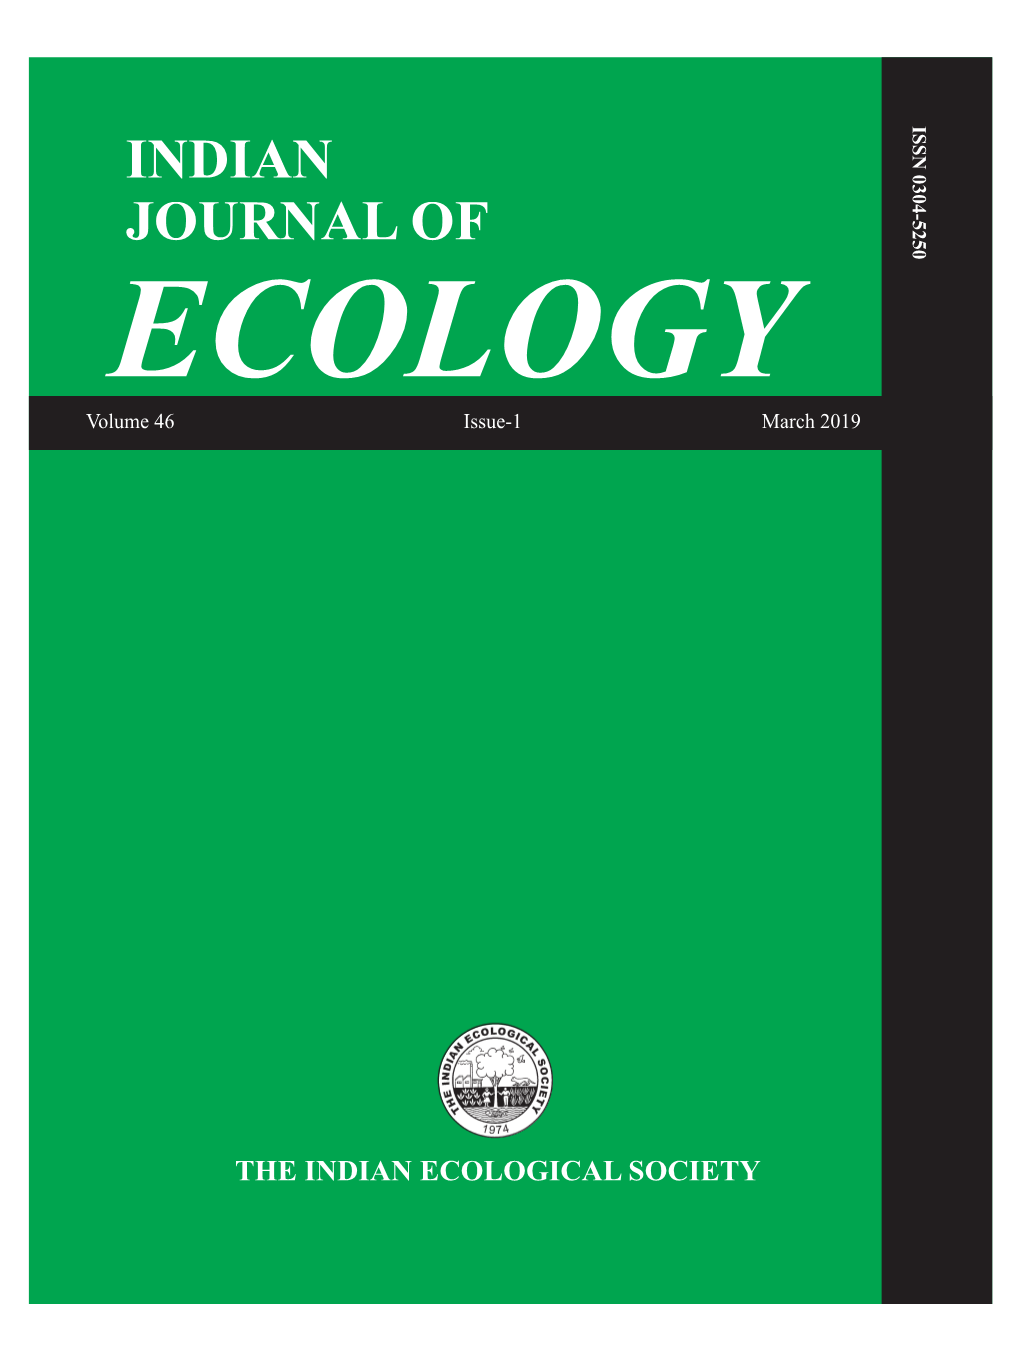 INDIAN JOURNAL of ECOLOGY Volume 46 Issue-1 March 2019